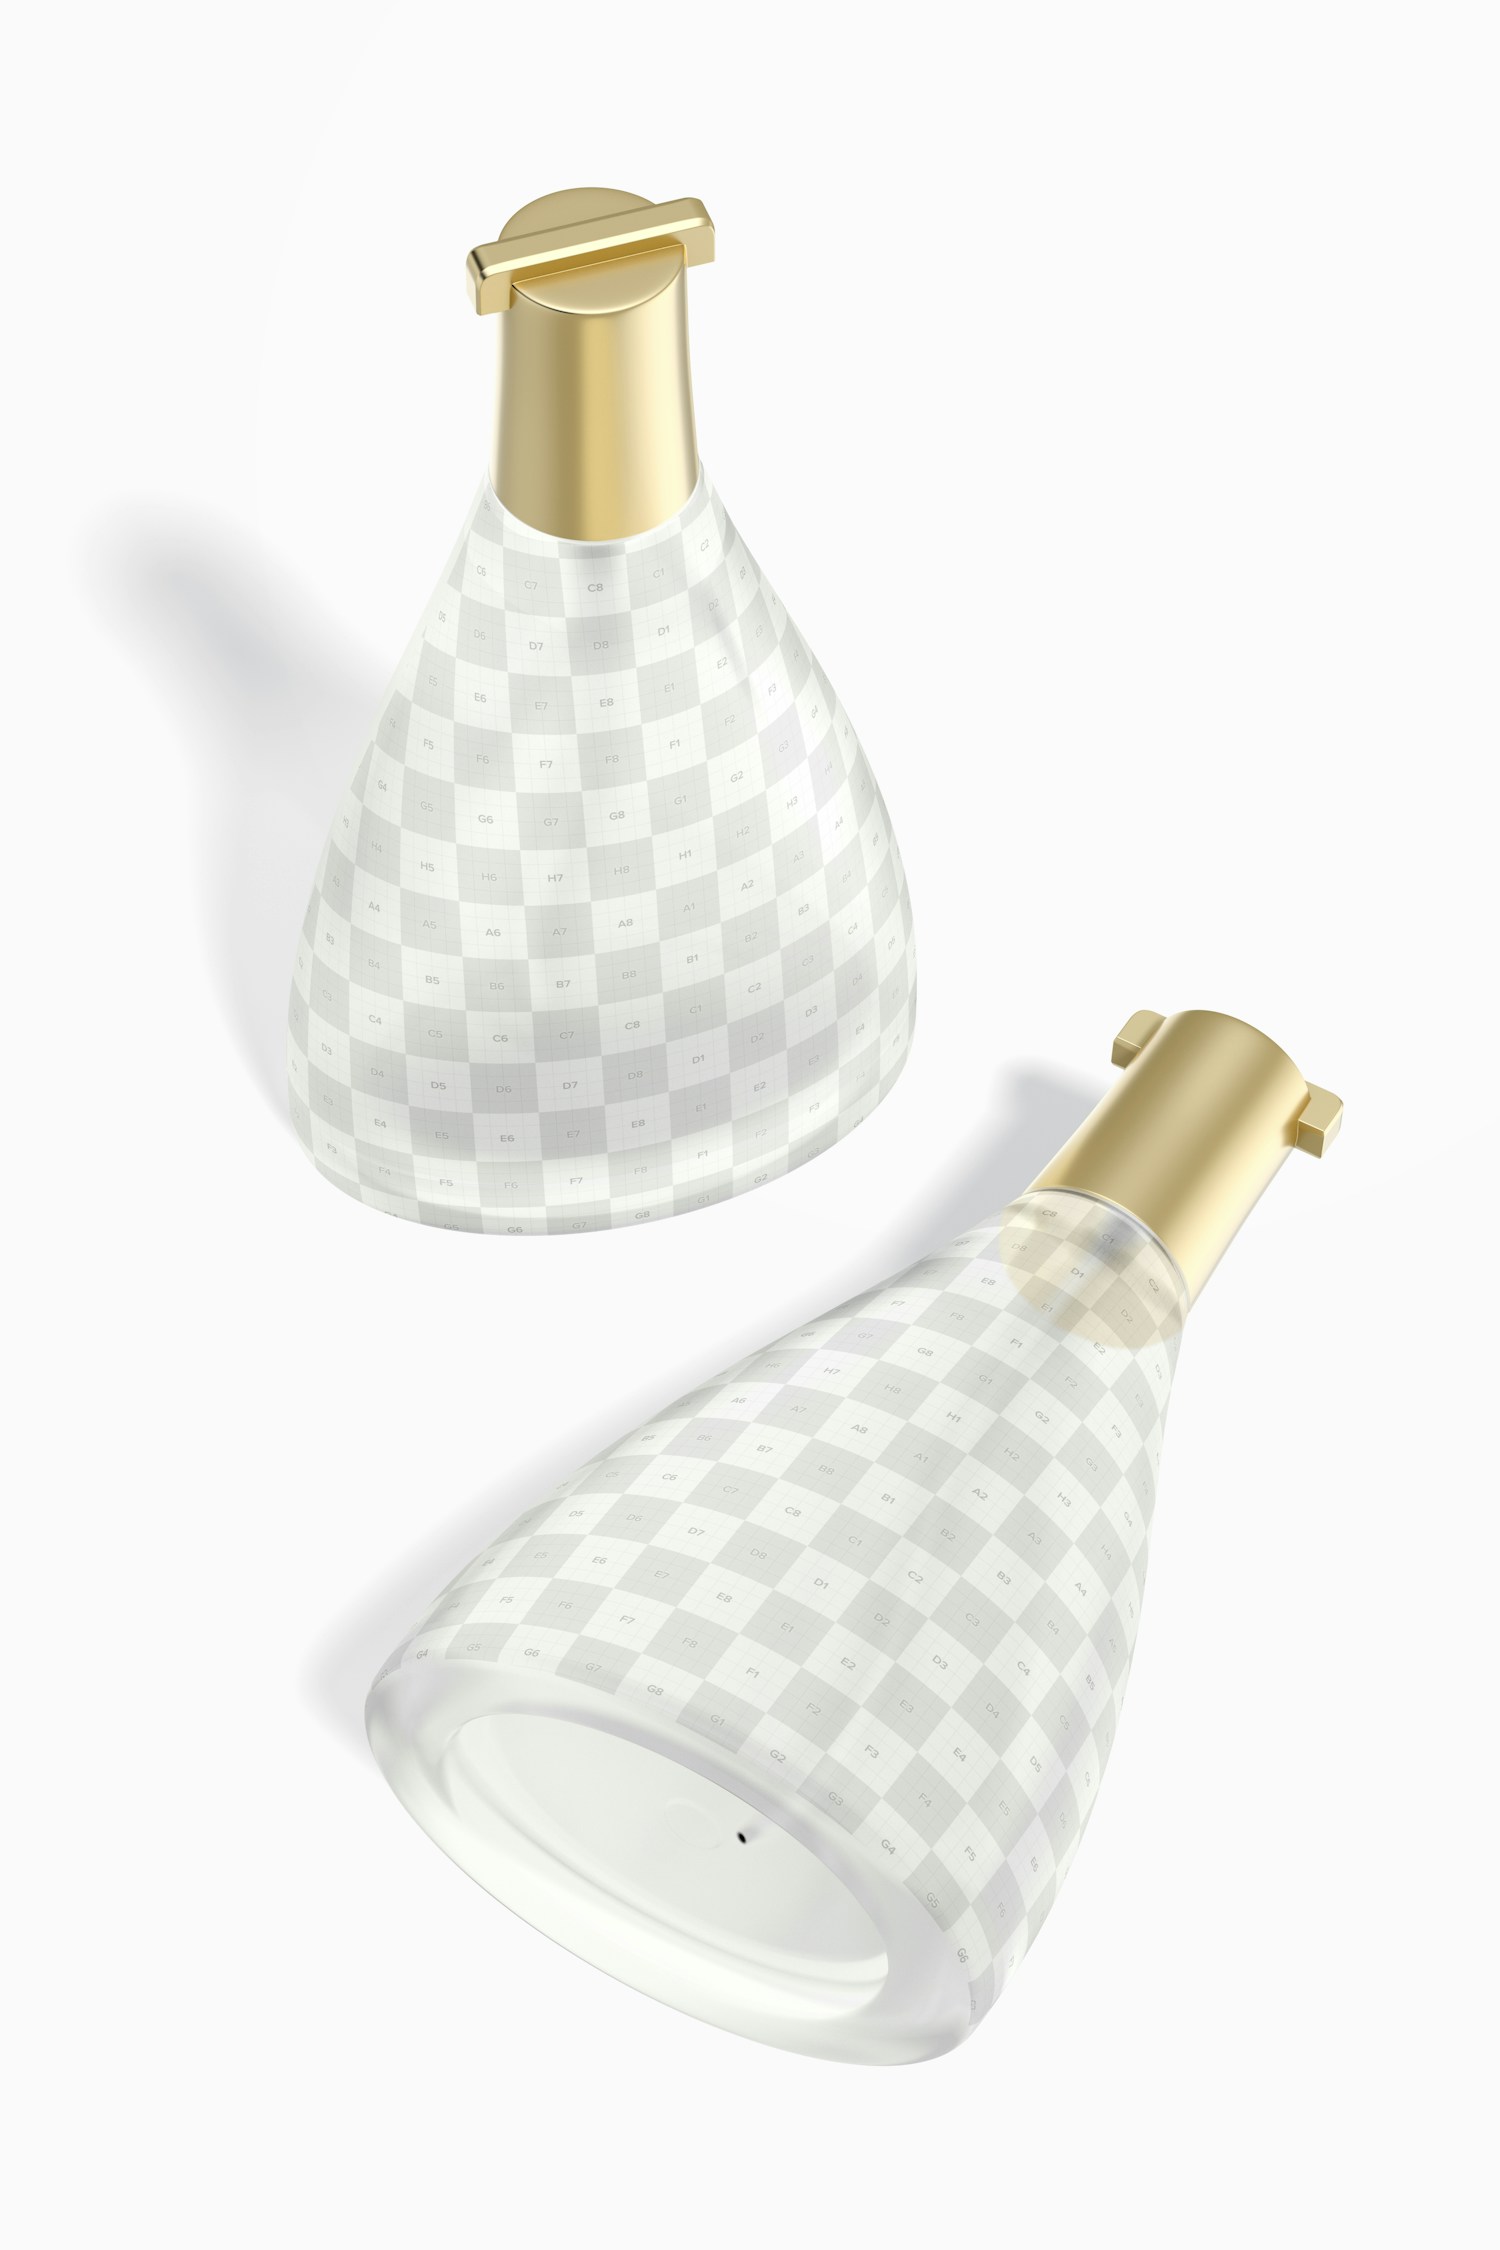 Triangular Luxury Perfume Bottles Mockup, Standing and Dropped